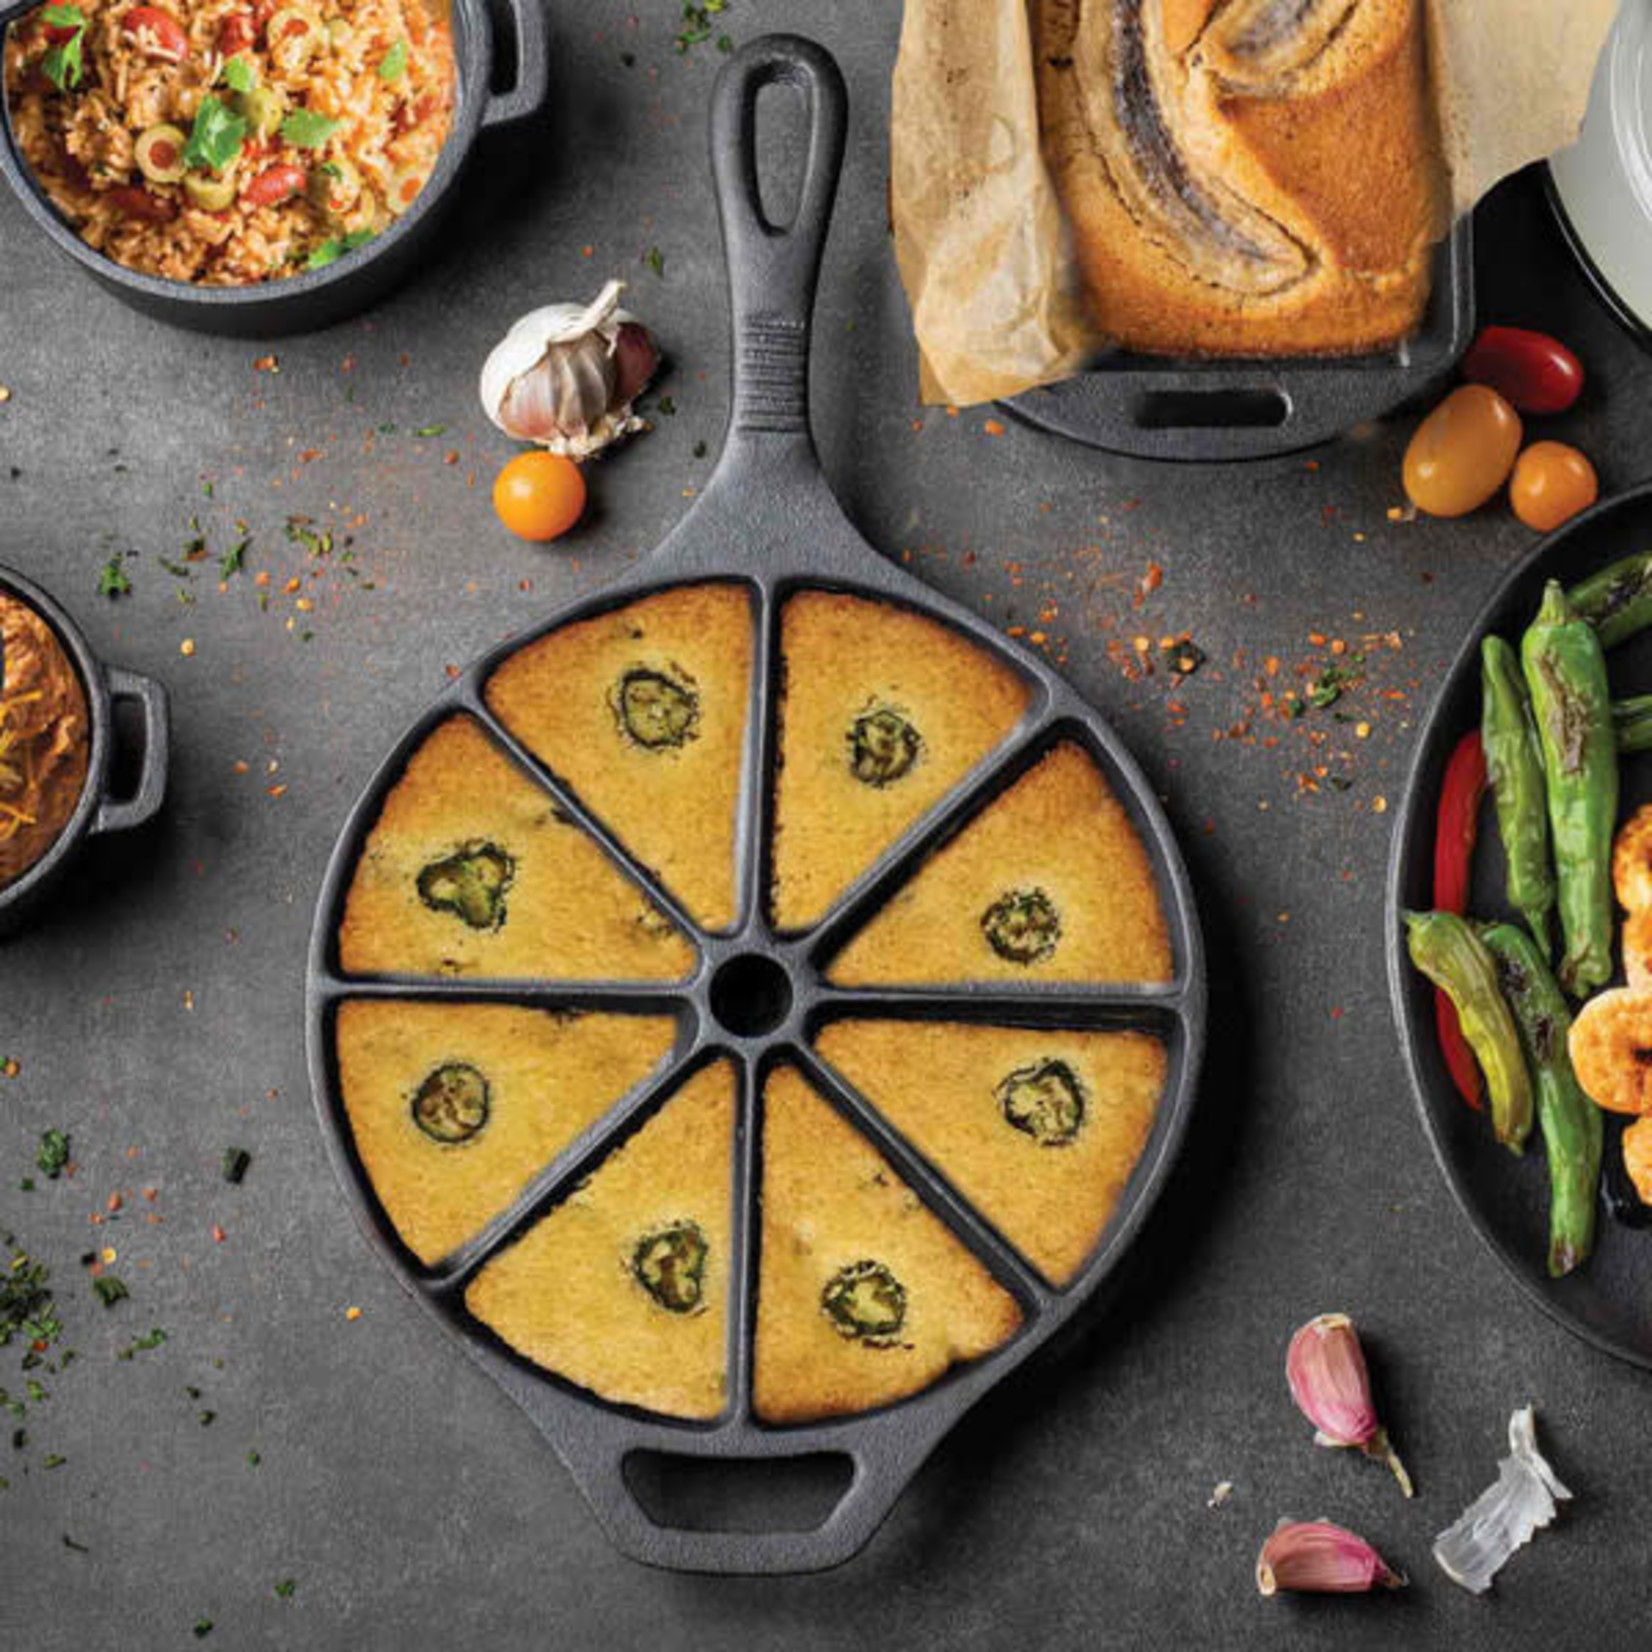 TableCraft Round Corn Bread Skillet with Handle, Cast Iron, 8.75" dia x 15.625" (5.5" Handle)